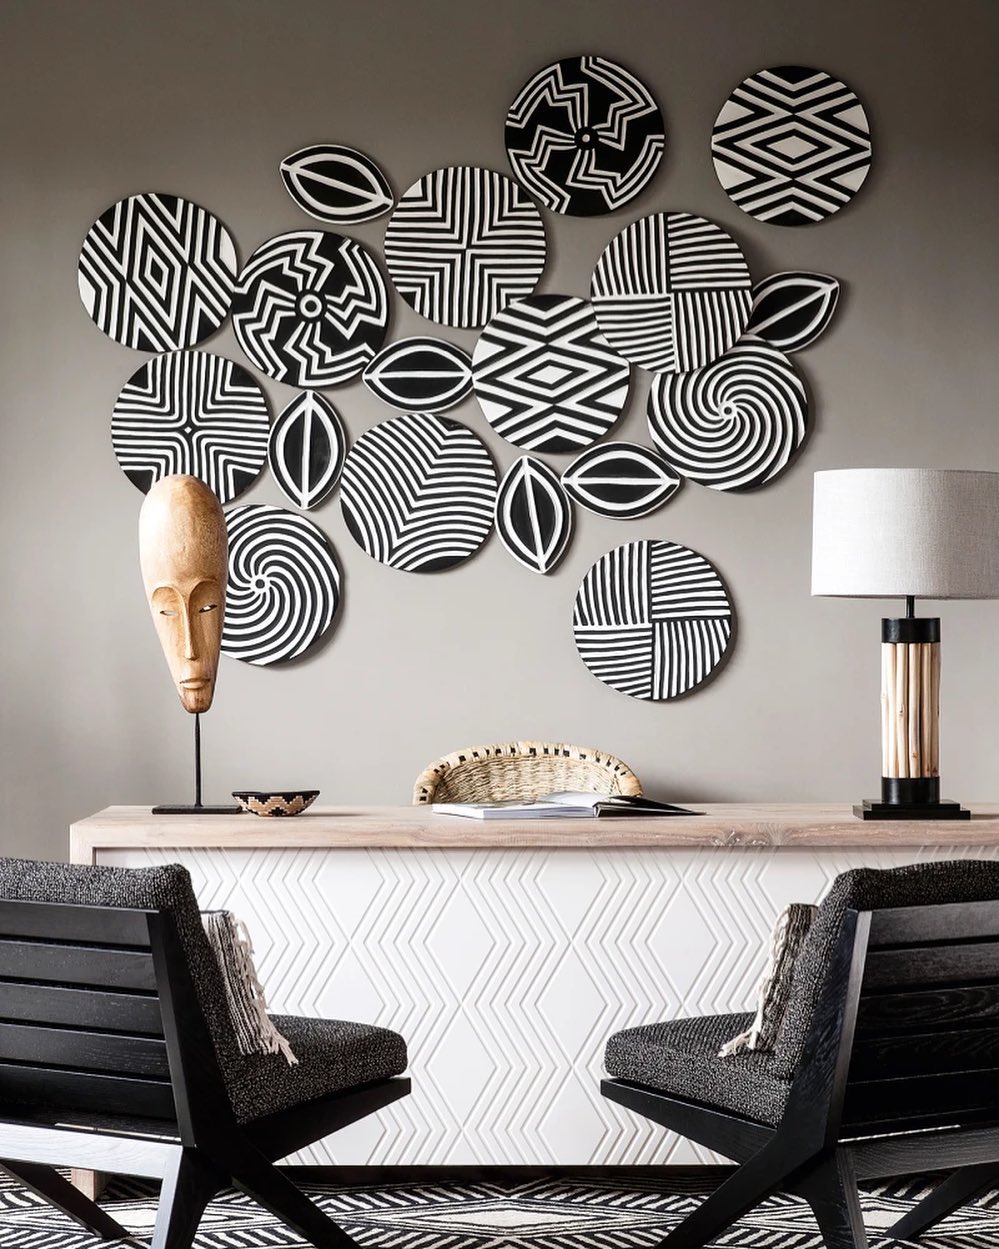 41 Striking Africa-Inspired Home Decor Ideas - DigsDigs